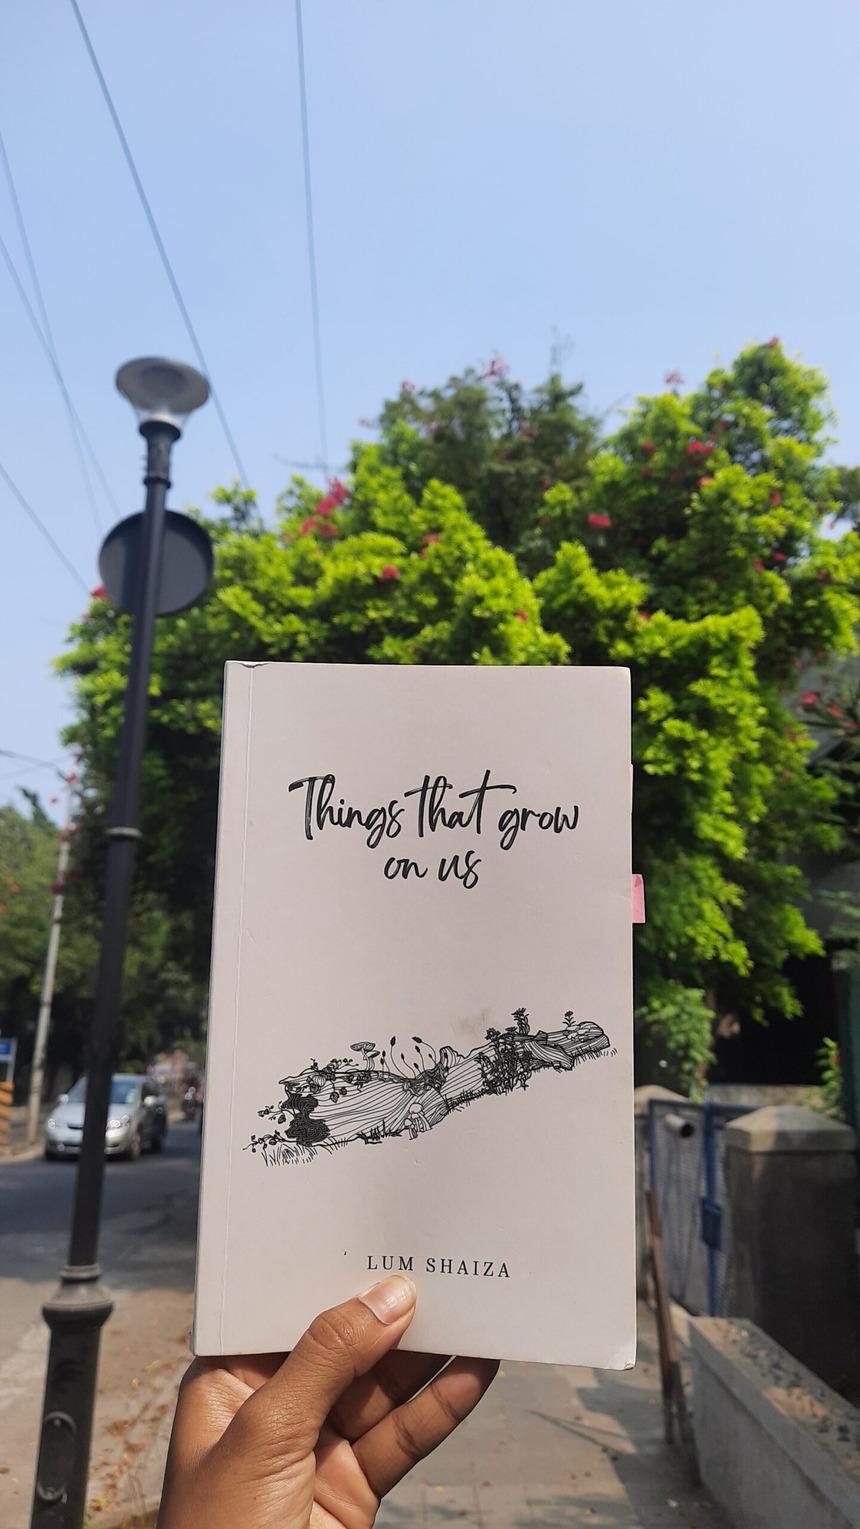 “Things that grow on us”- Review